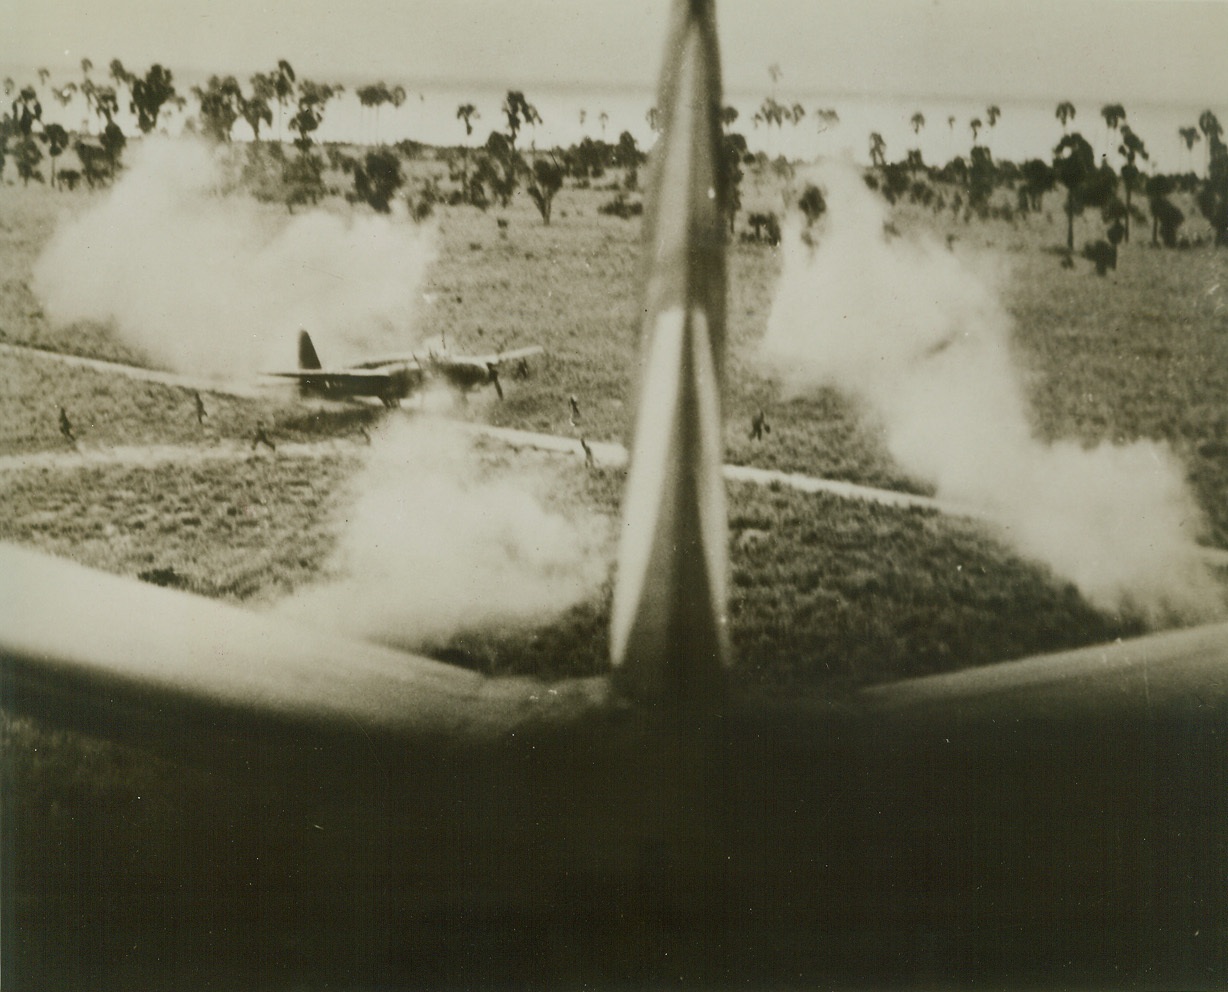 Japs Run During Yank Attack, 10/13/1944. Looking back past the tail of an American plane as it zooms up into position for another attack, Japanese crewmen can be seen running for cover, leaving a Kawasaki “Lily” plane burning on the Selaroe airstrip in the Netherlands East Indies.  Yank aircraft raided the strategic field recently and pilot reported the mission a success. Credit (USAAF Photo from ACME);